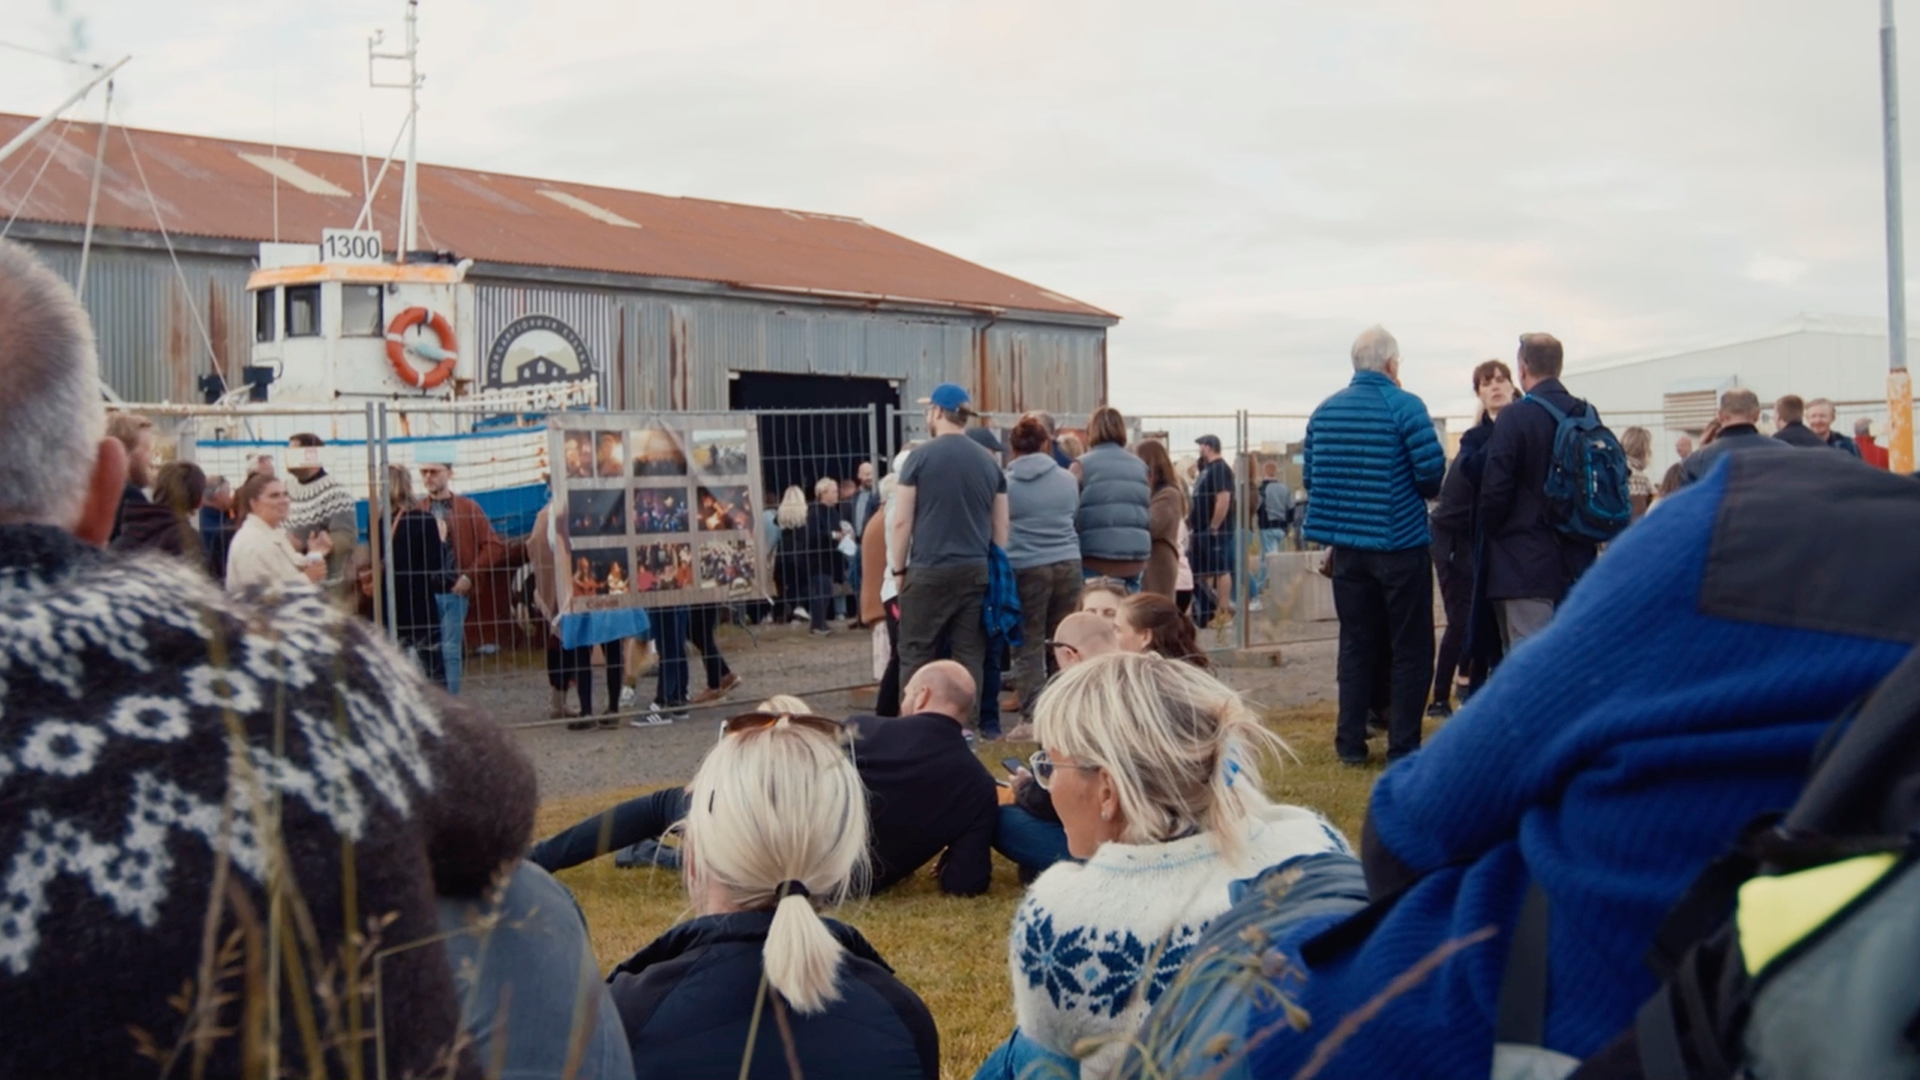 An audience gathers outside an abandoned fish factory for Braedslan music festival